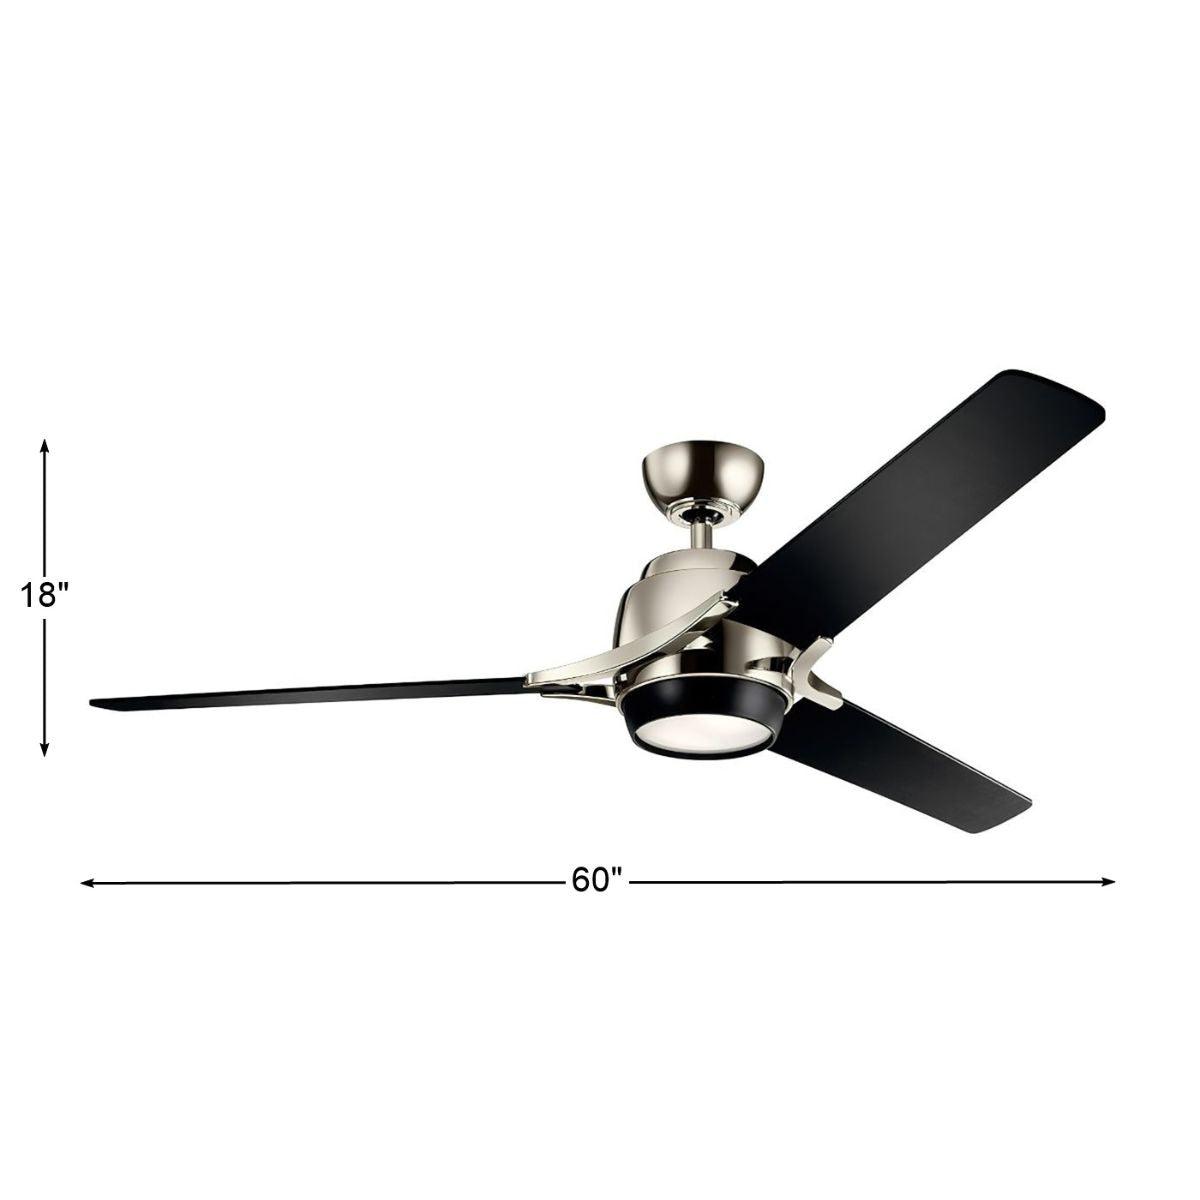 Zeus 60 Inch Modern Ceiling Fan With Light, Wall Control Included - Bees Lighting